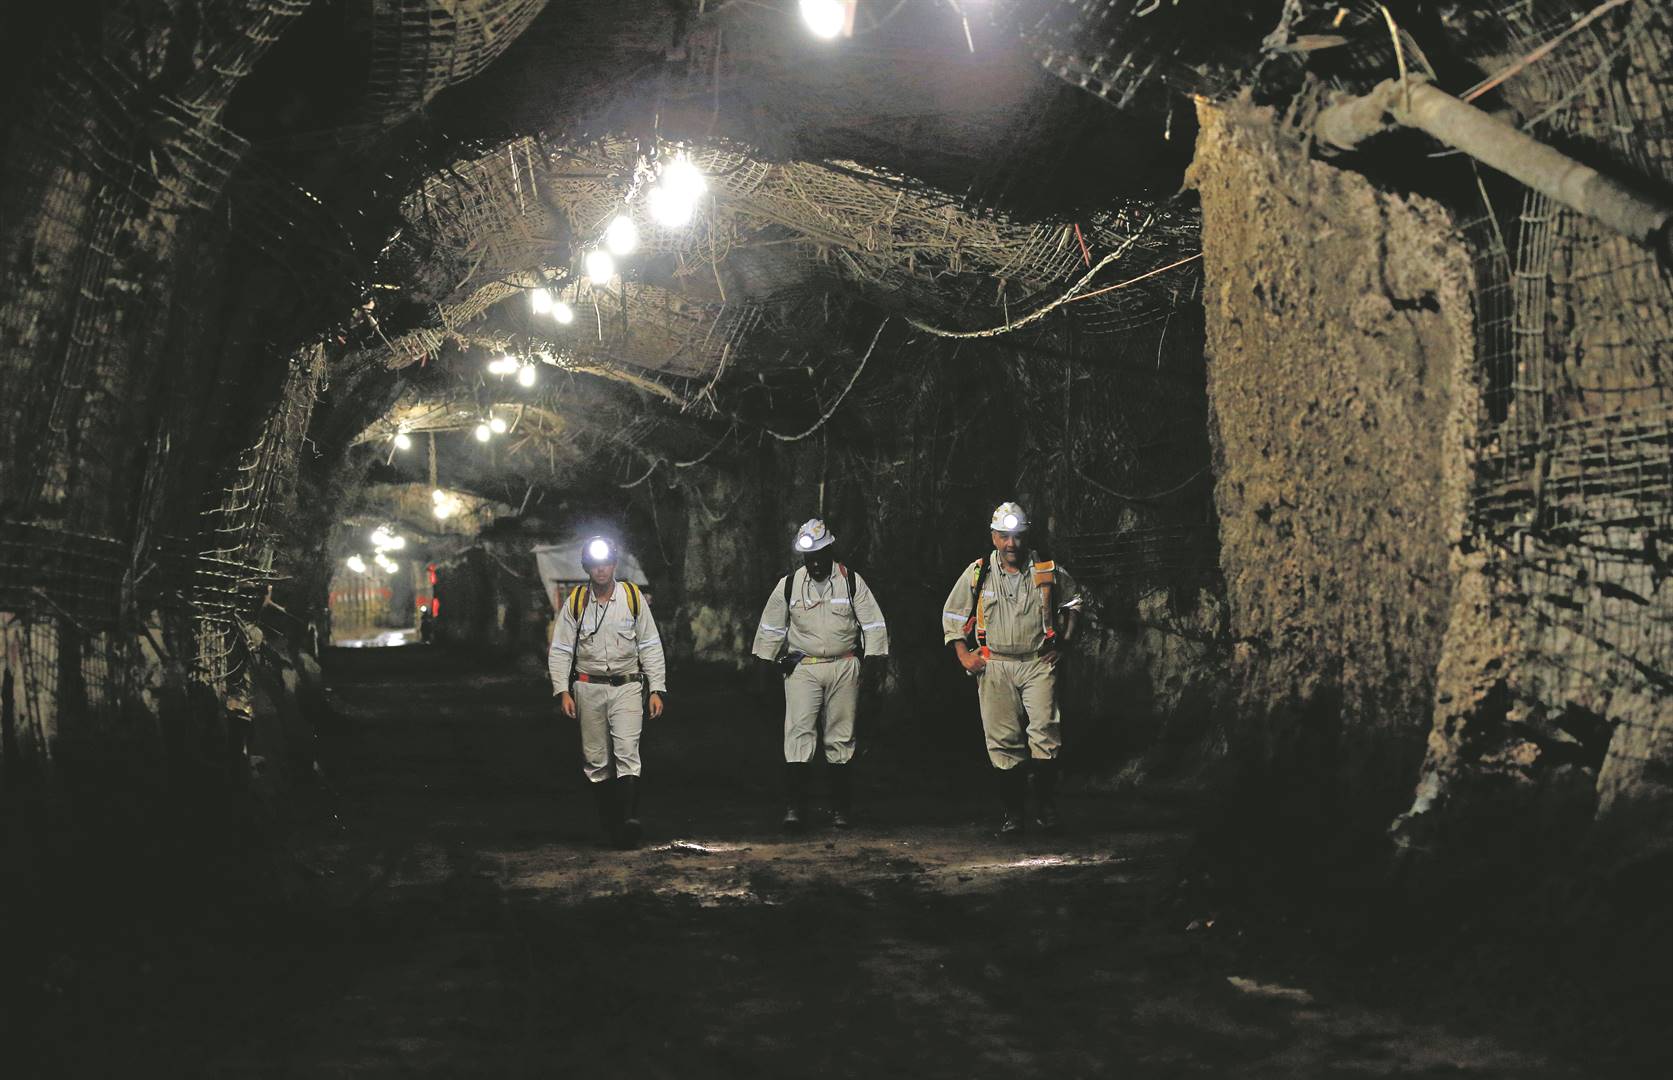 The mining sector continues to face logistical constraints, leading to an annual contraction